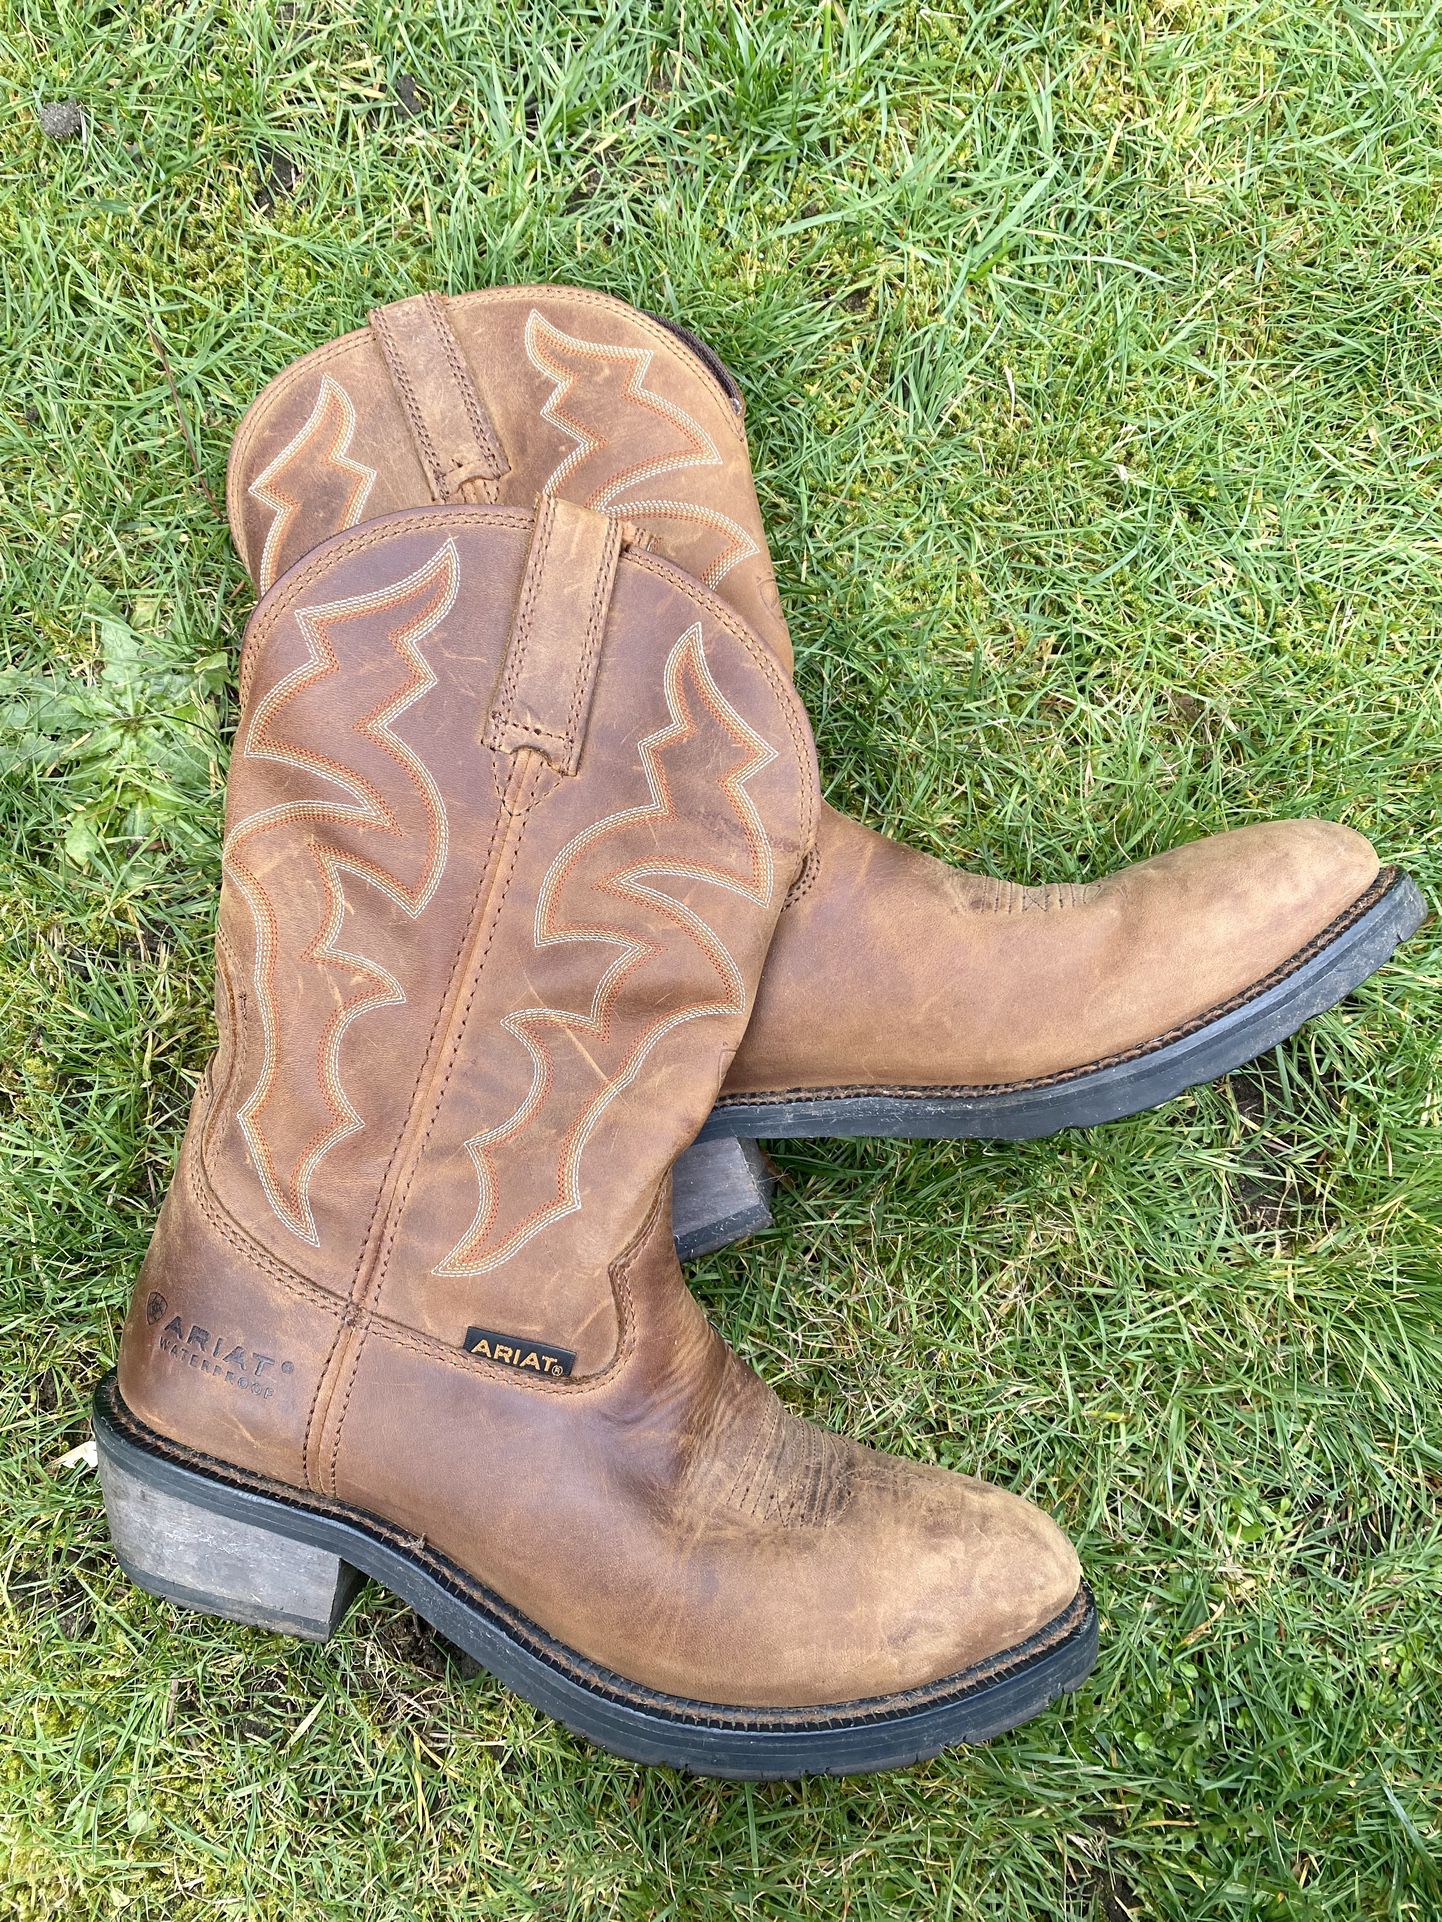 Ariat Cowboy Boots *Waterproof* Excellent Condition